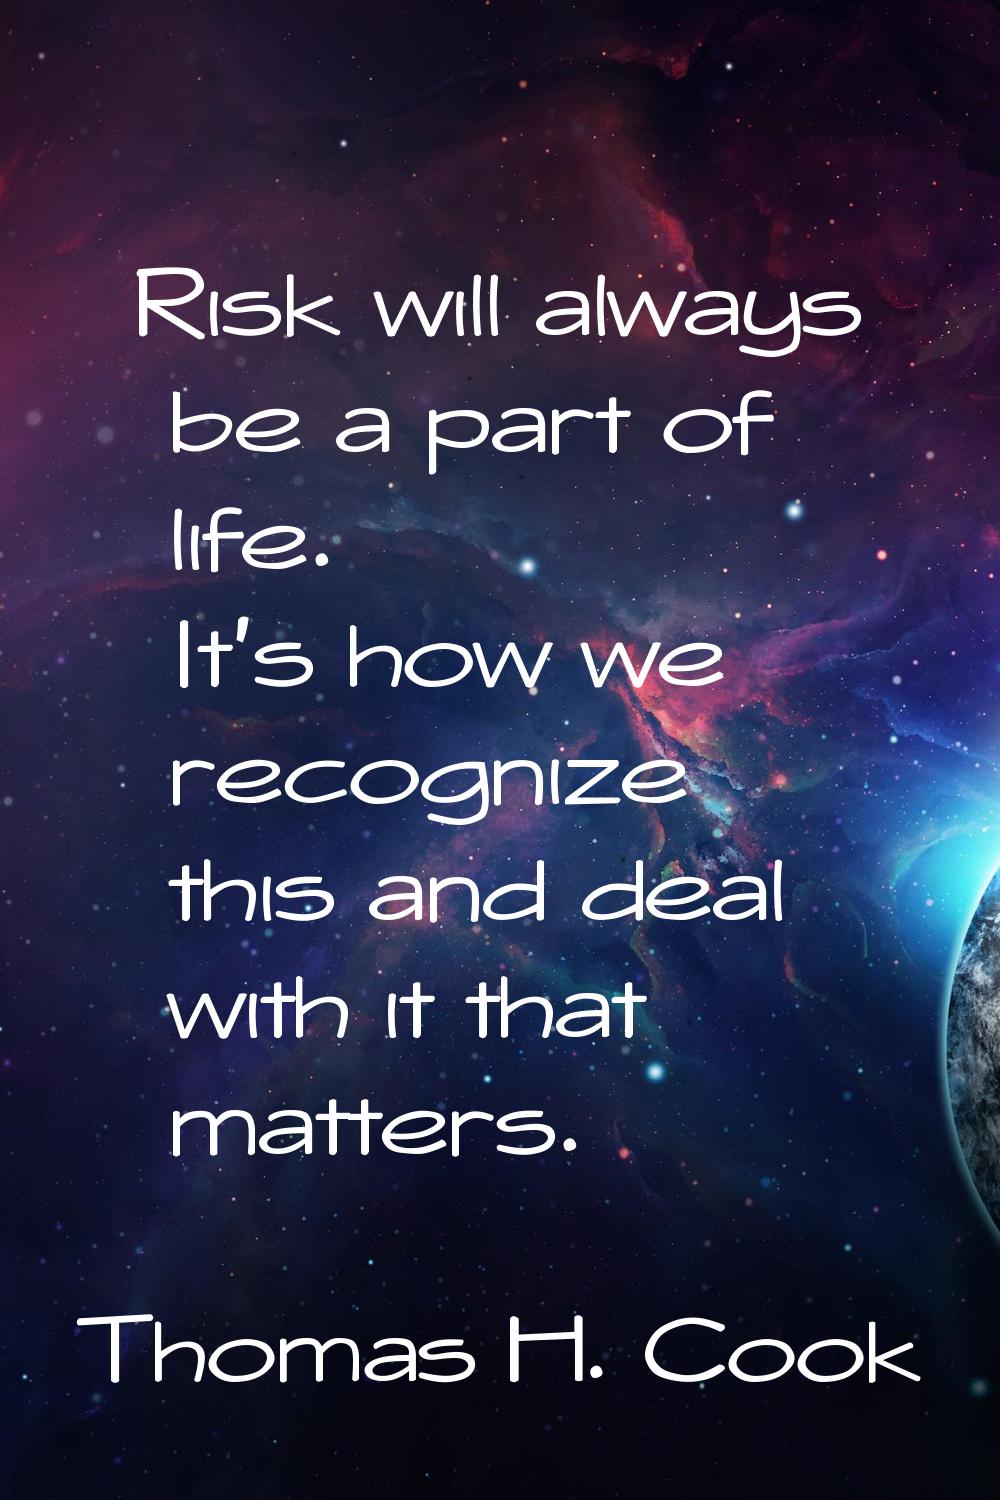 Risk will always be a part of life. It's how we recognize this and deal with it that matters.